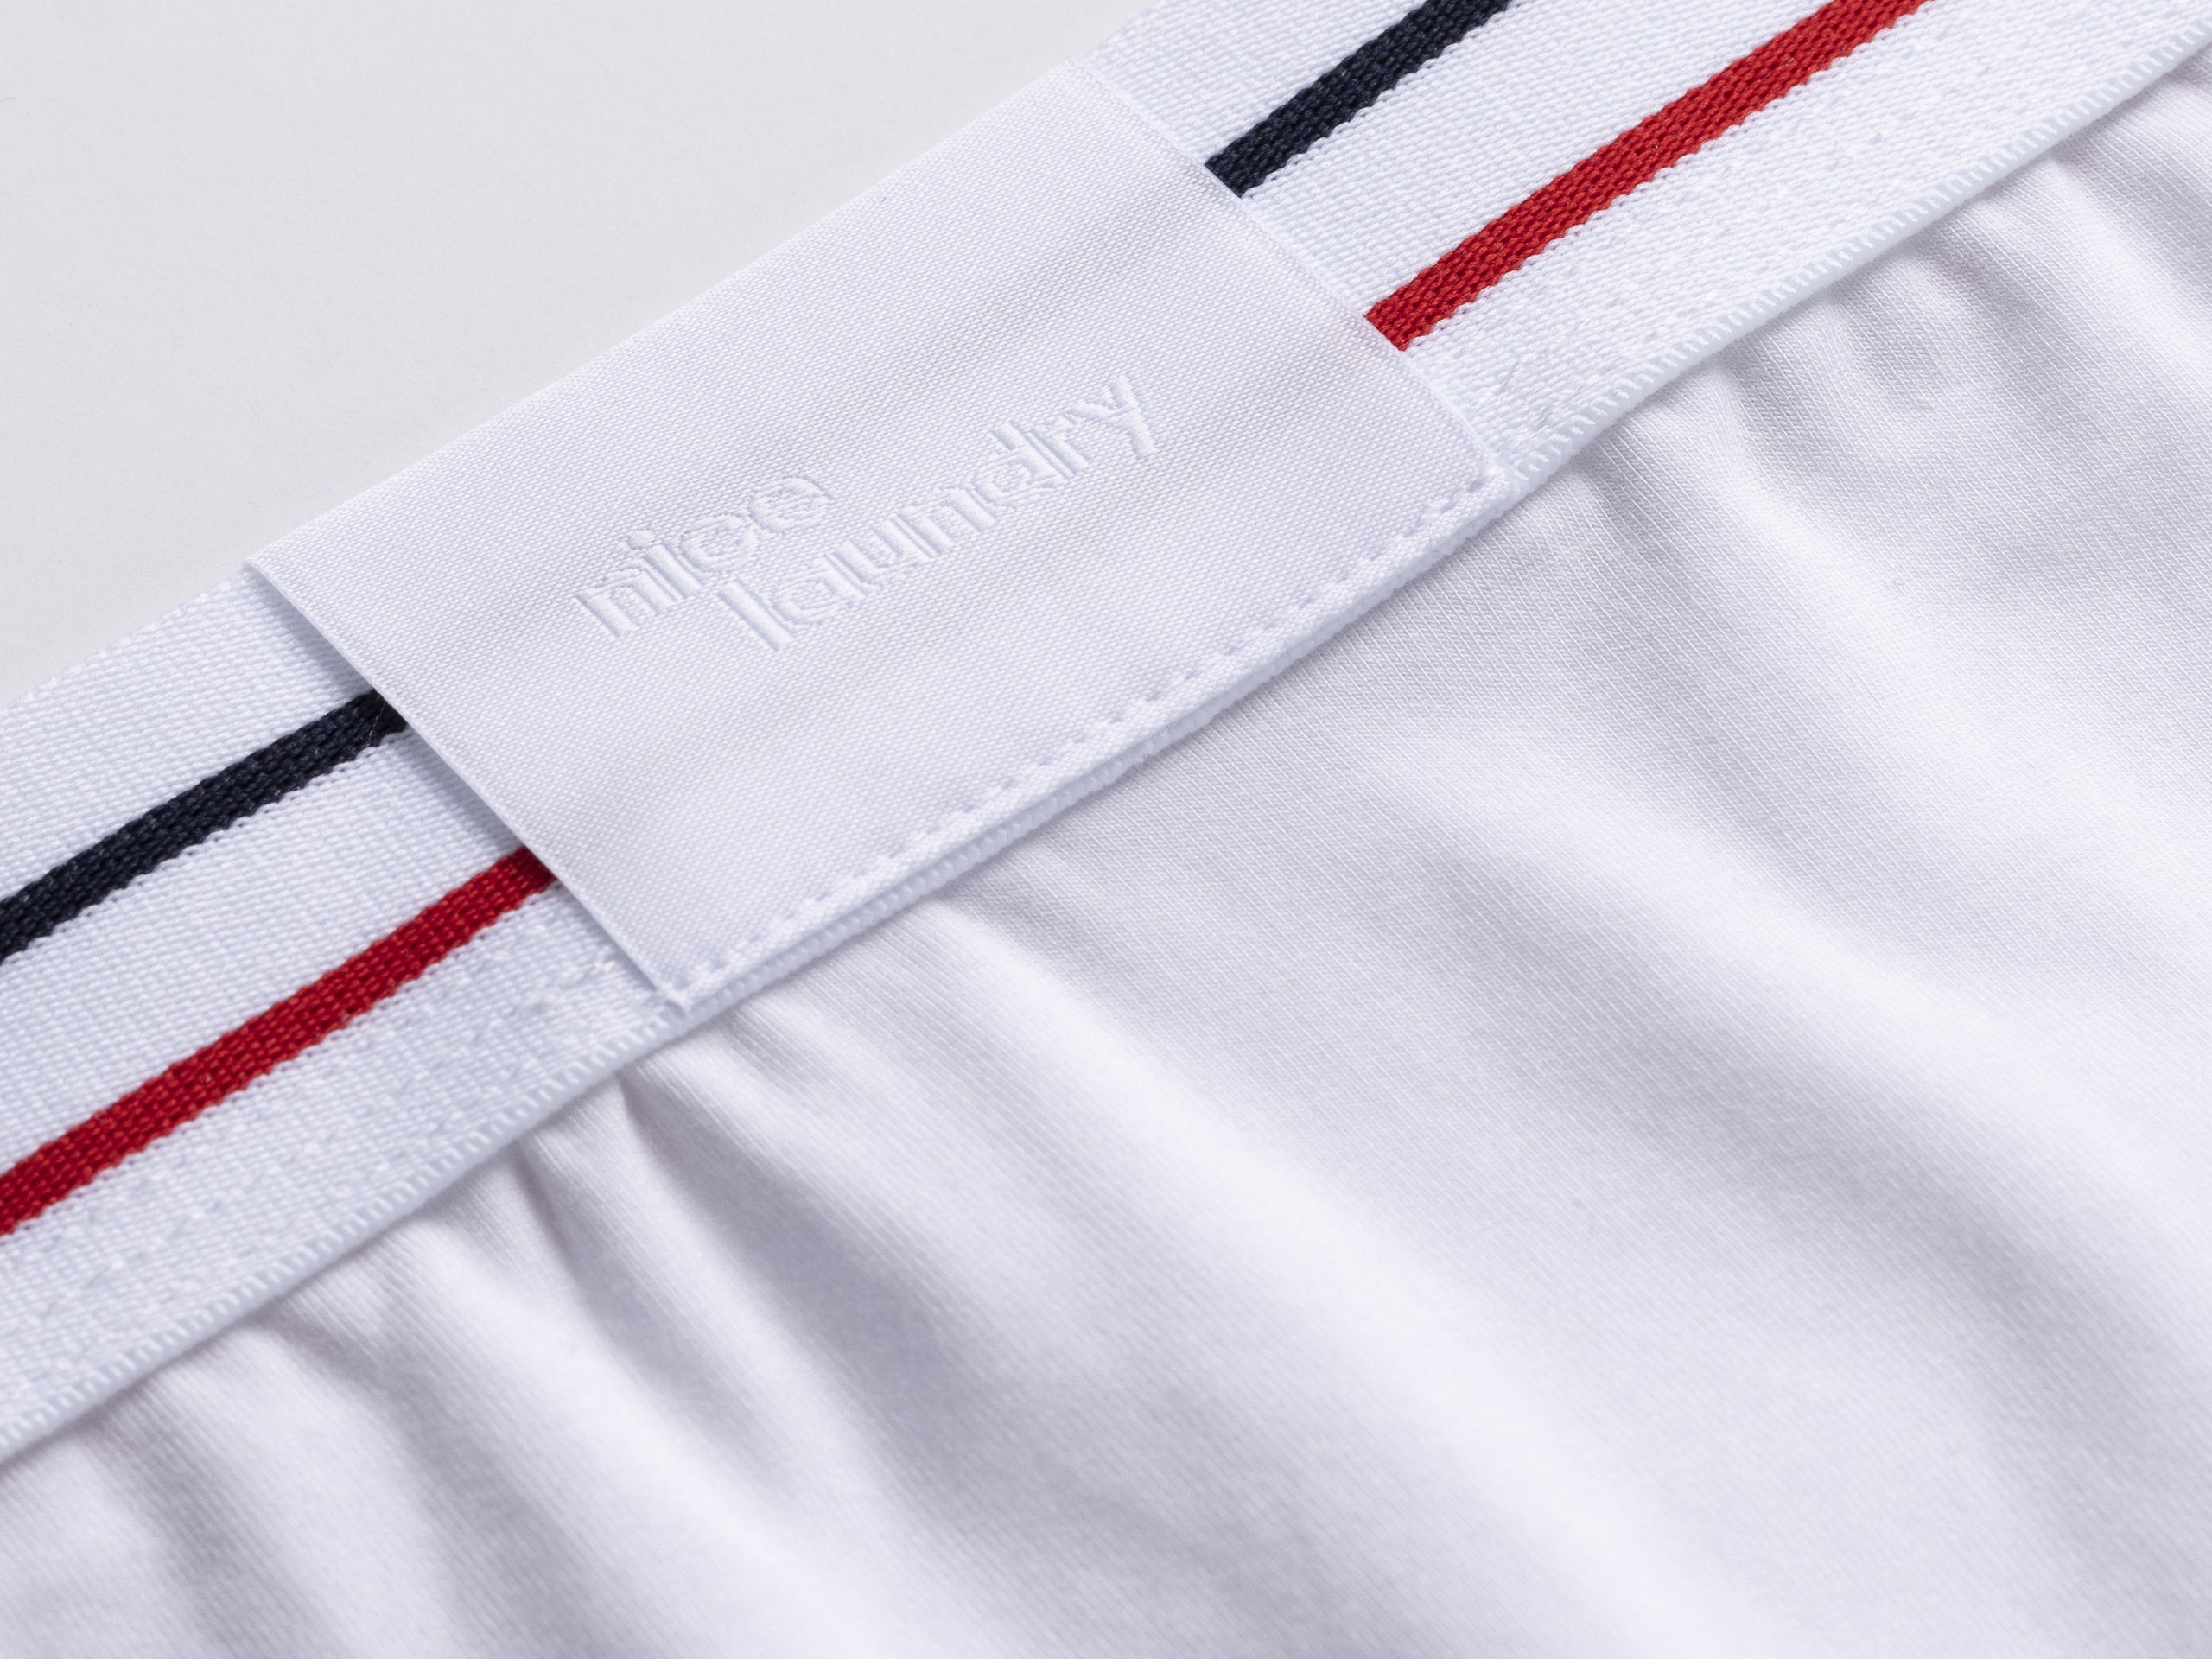 Close up detail shot of red white and blue stripe waist band found on brief.